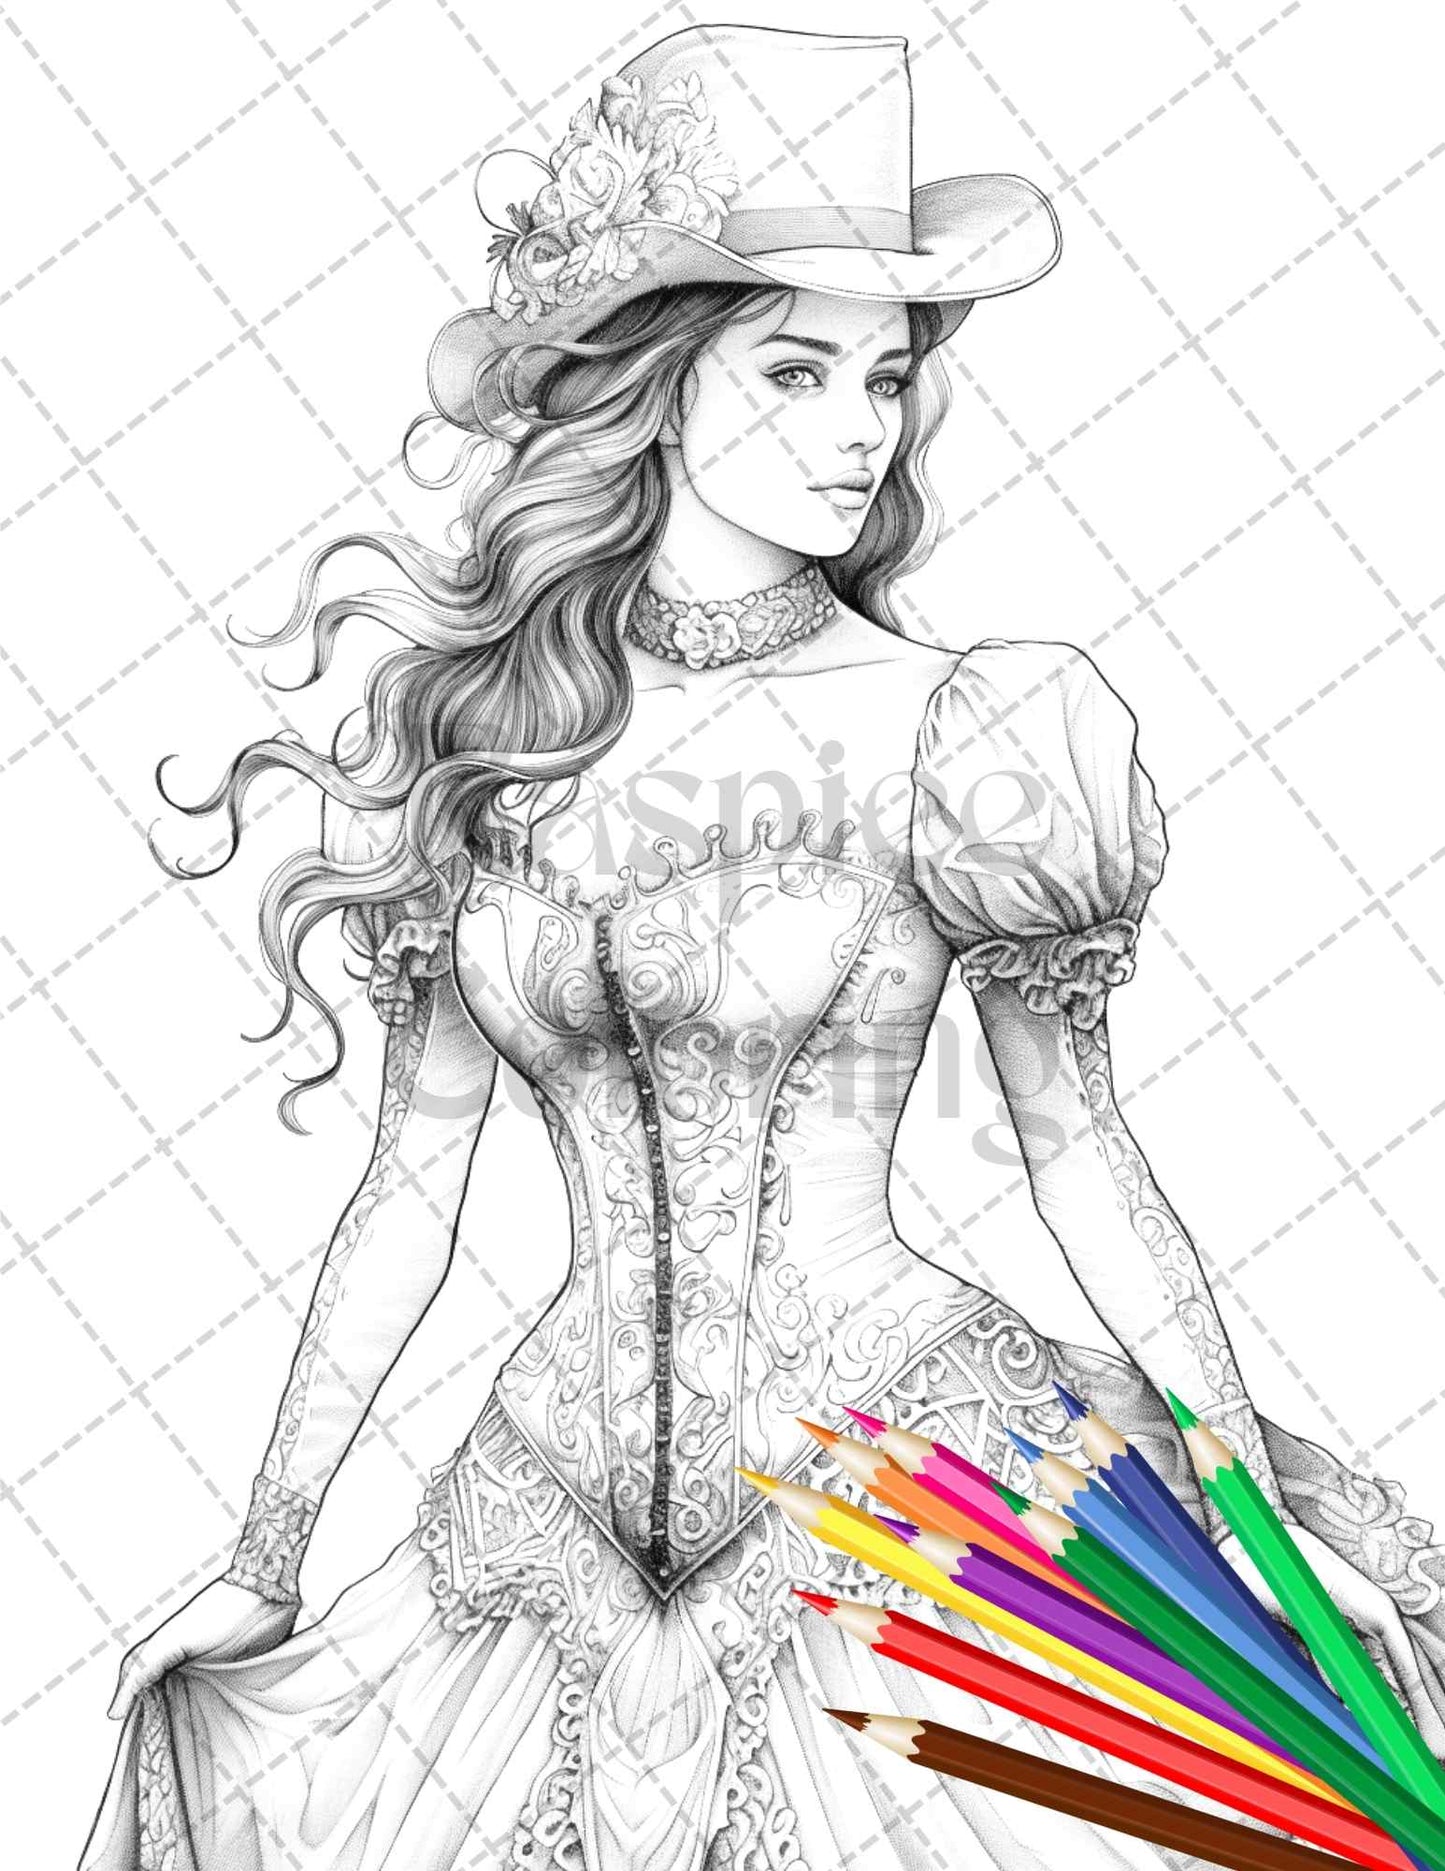 Victorian fashion grayscale coloring pages, printable grayscale coloring sheets, grayscale illustrations for adults, vintage fashion coloring, detailed grayscale artwork